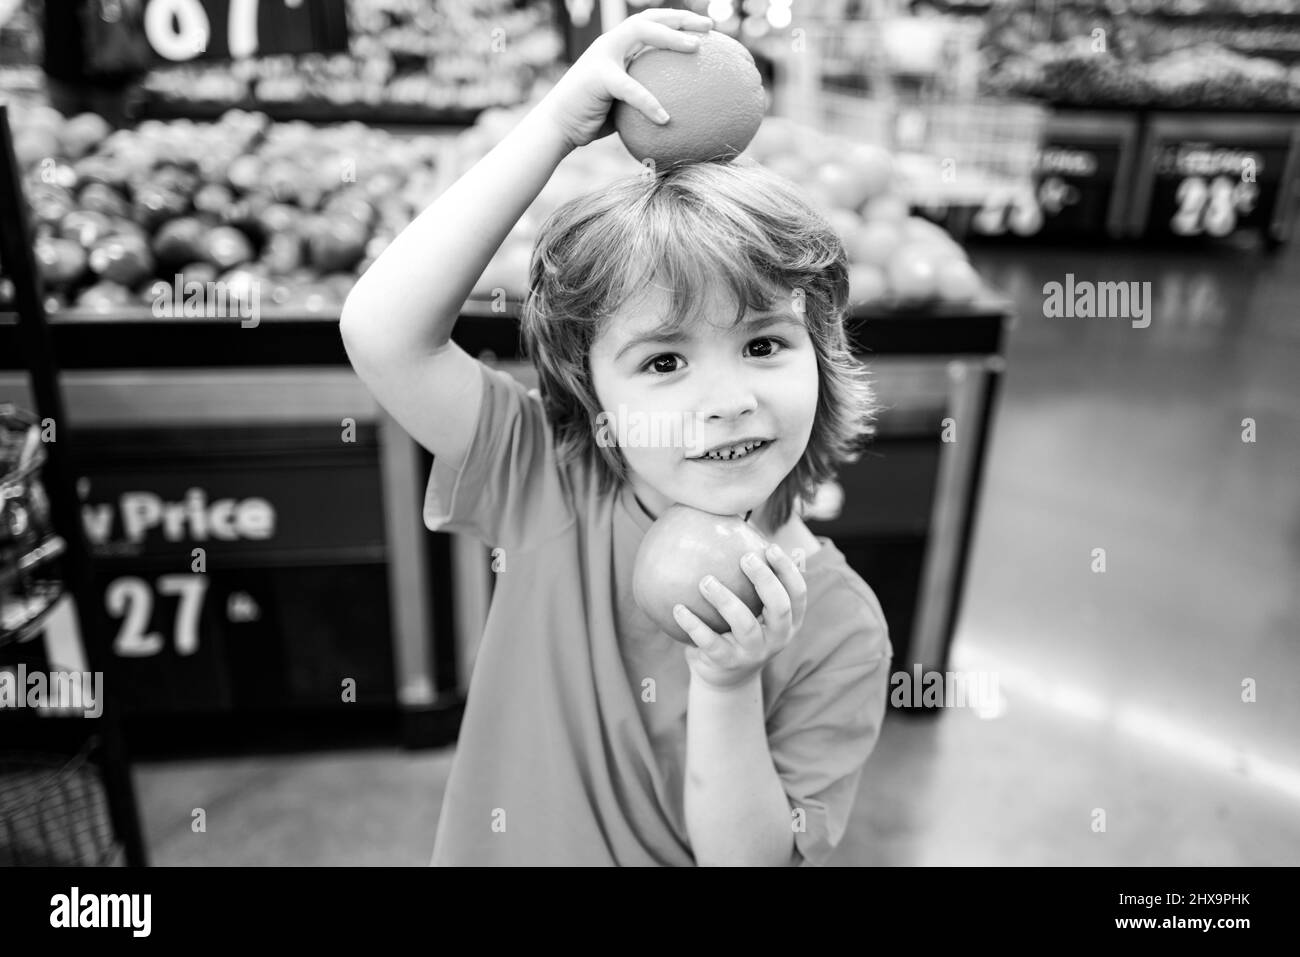 American kid with shopping trolley with in grocery store. Supermarket, Shopping with Child. Stock Photo